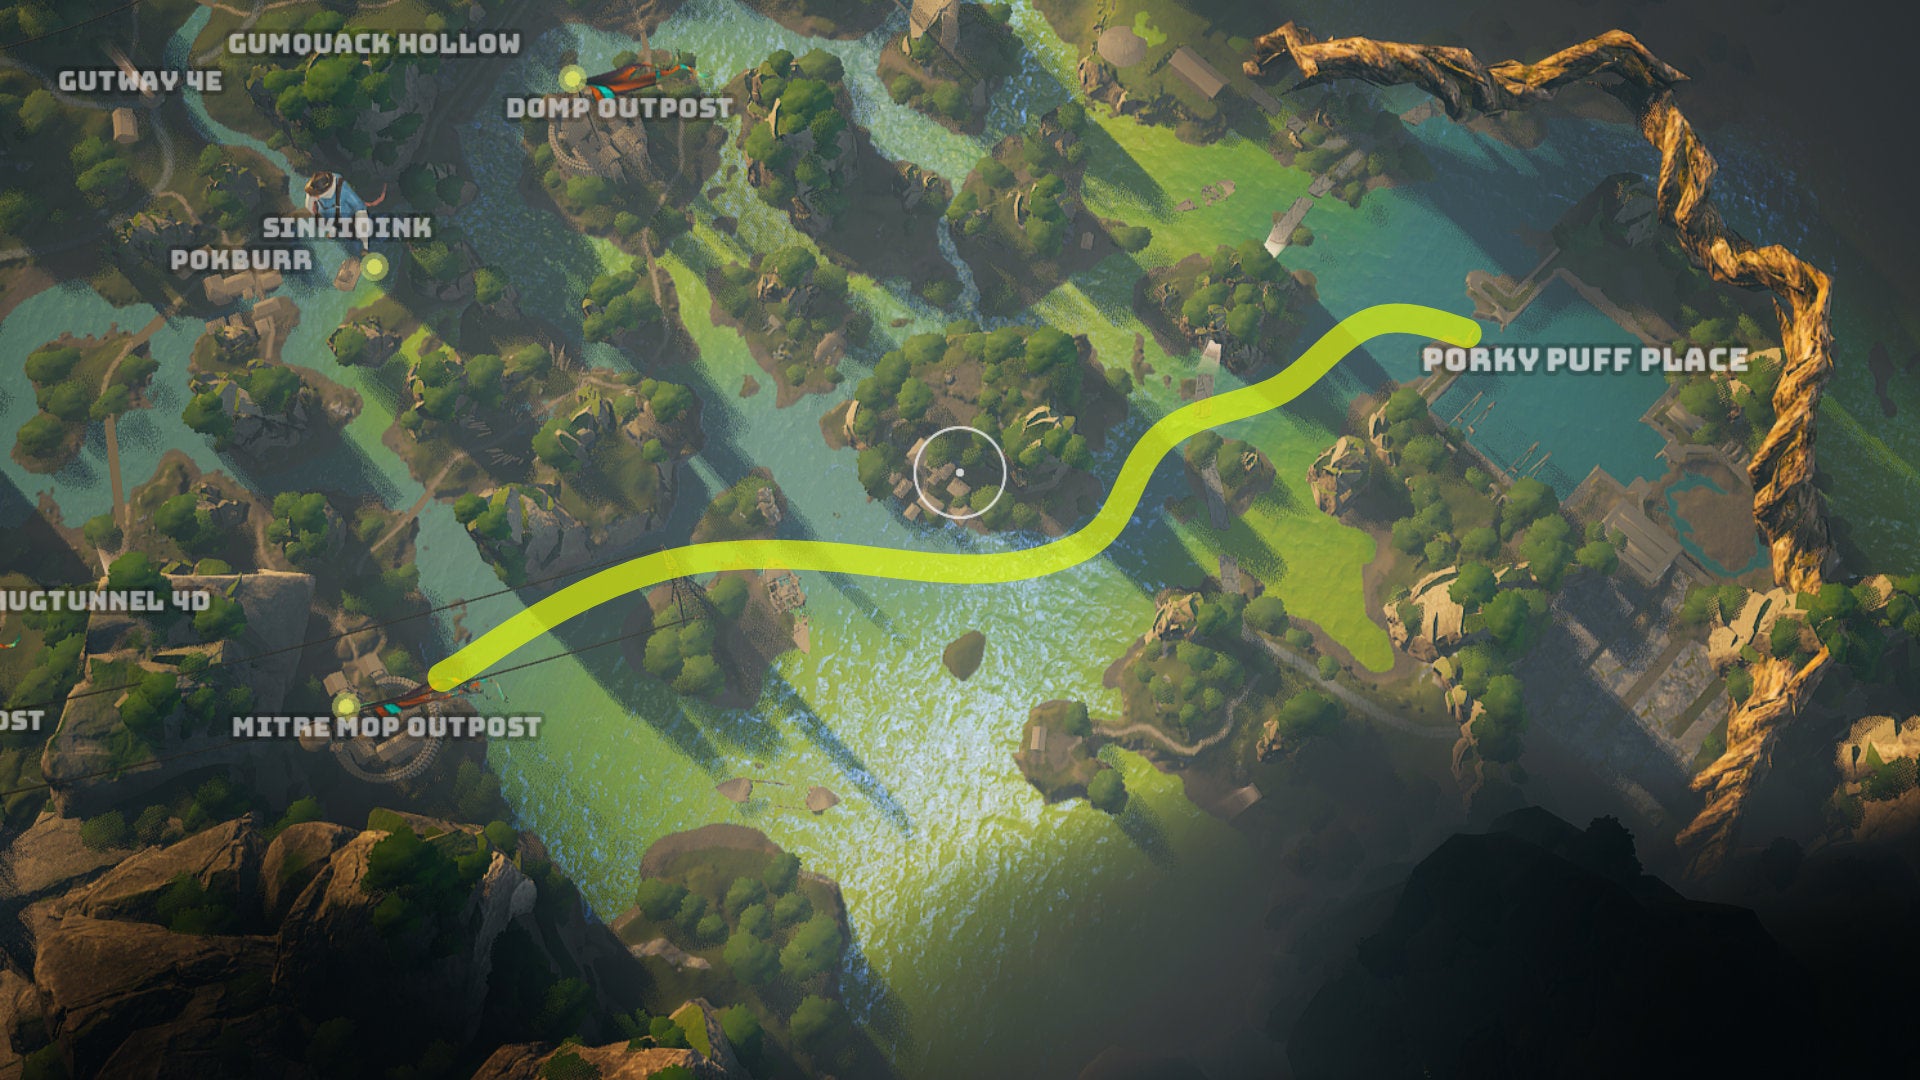 A screenshot of part of the Biomutant map, highlighting the route through clear water towards the Porky Puff boss location.